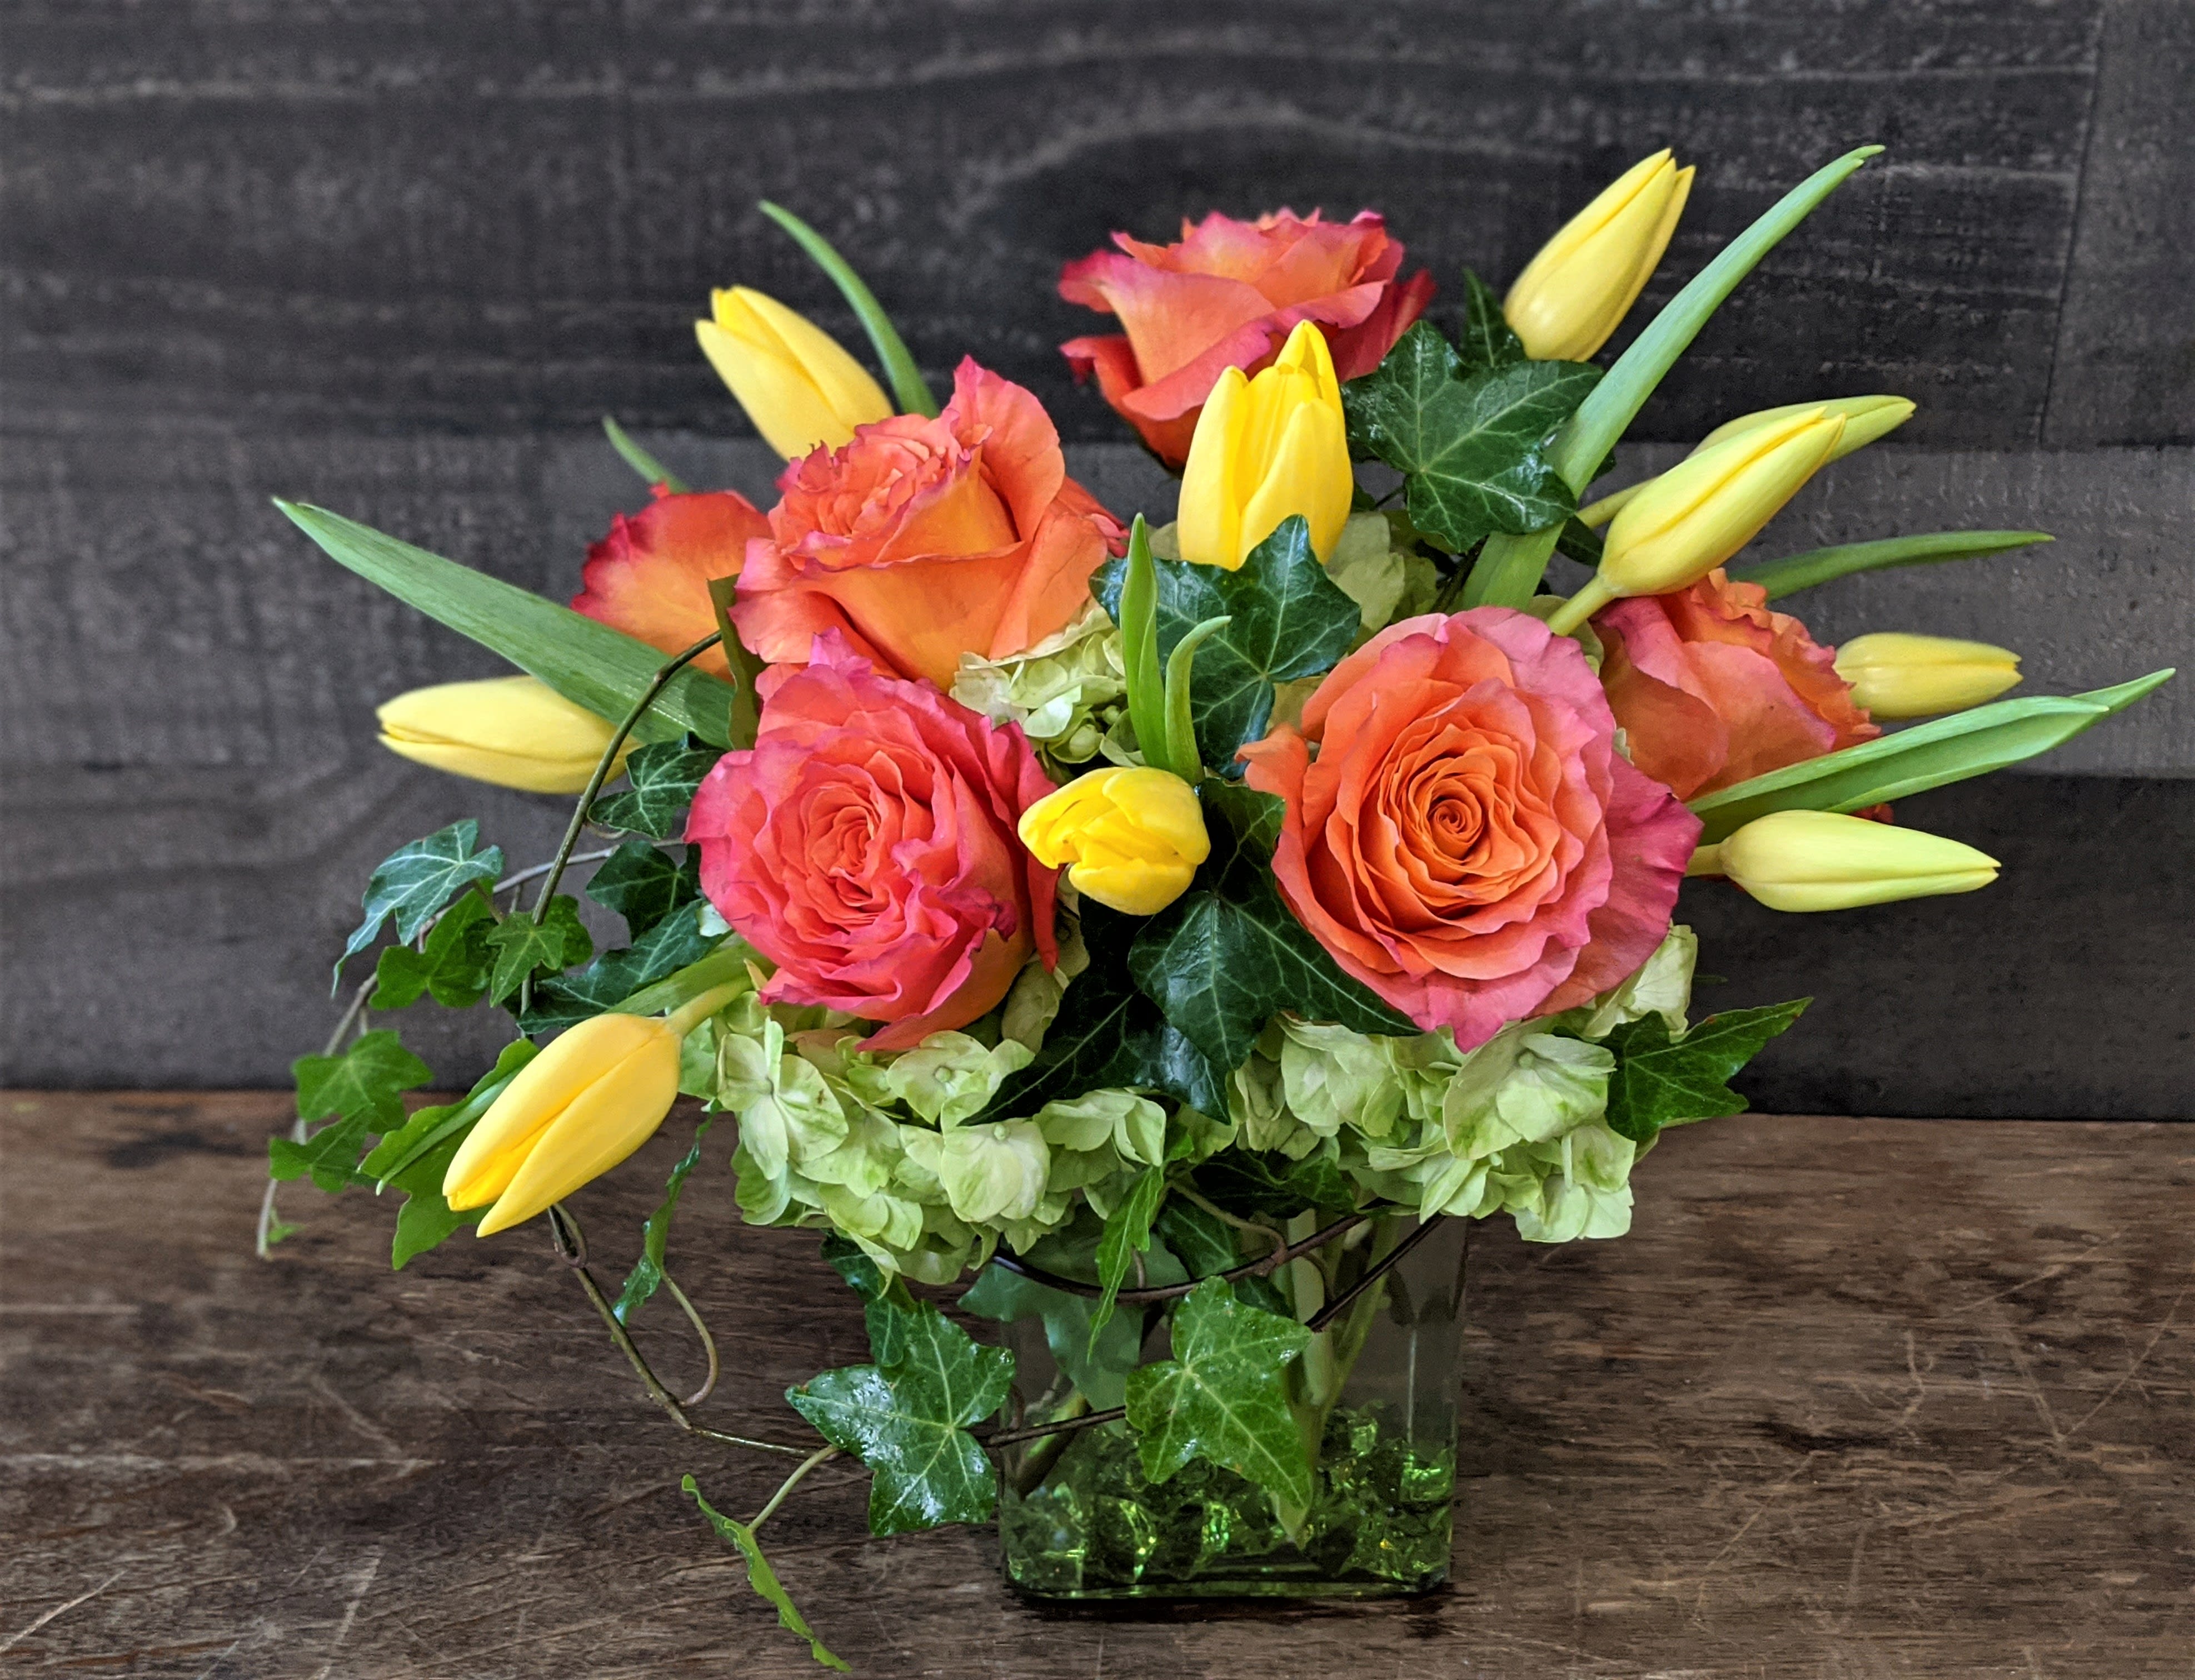 Sun Kissed Citrus - Shown as Standard Free spirit roses, hydrangea, tulips and ivy comes arranged in a rectangular vase with accenting acrylic gems. *We custom design this arrangement and use the freshest flowers available the day of delivery. The arrangement in this picture is an example of the size and style and may not feature the exact product shown.*